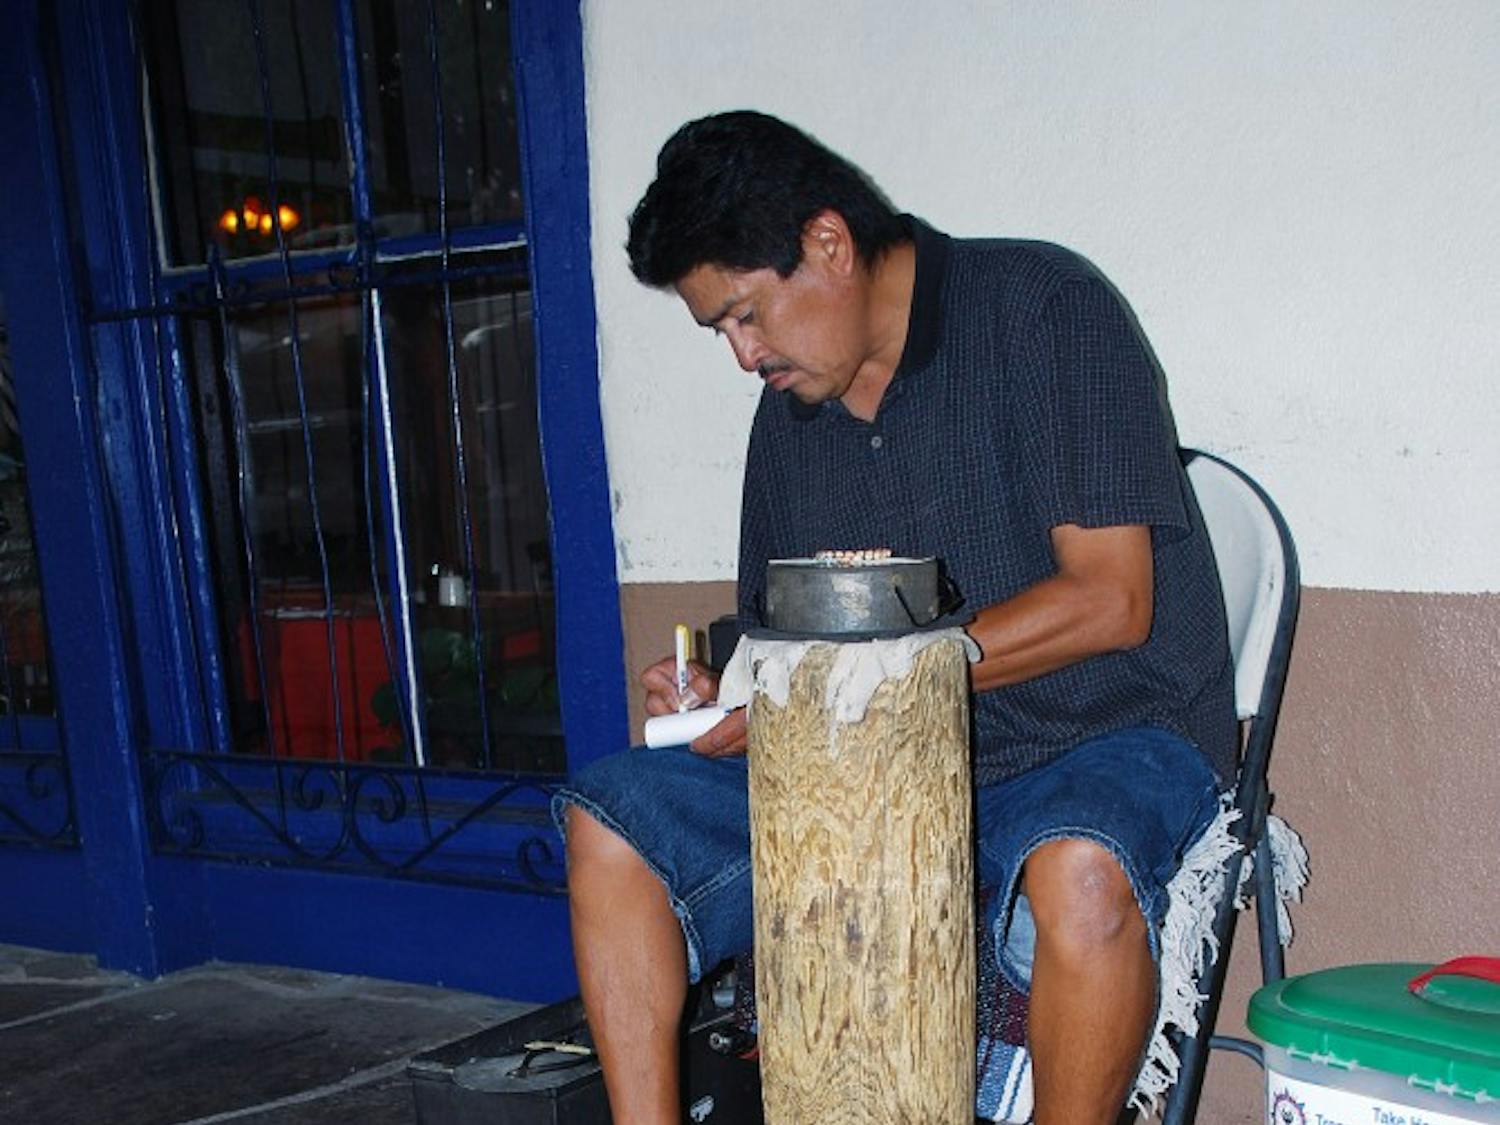 	Curtis Platero works on a jewelry piece in Old Town on July 25. An amendment went into effect on the state Indian Arts and Crafts Amendments Act that reduces the minimum stolen property value required for a felony from $20,000 to $500.